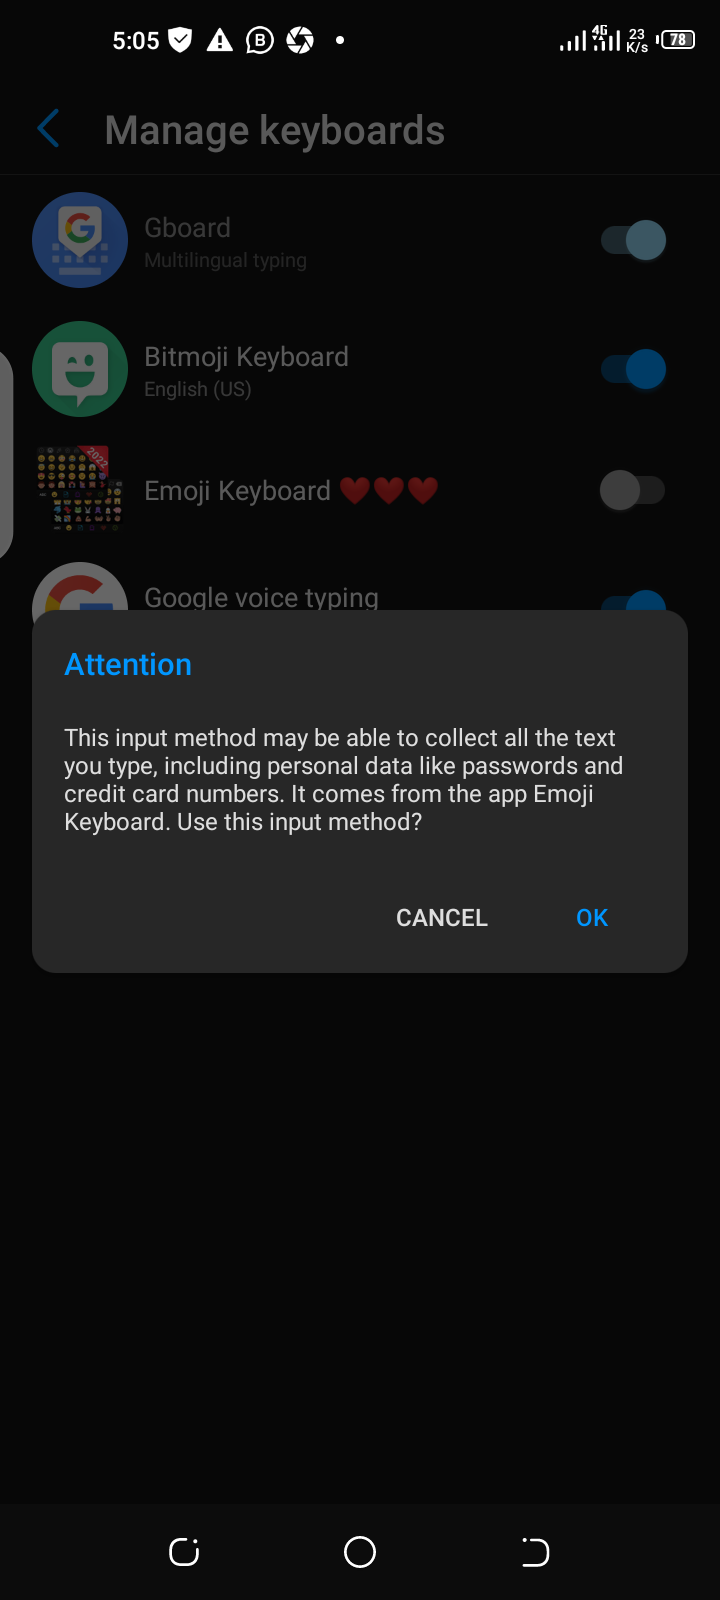 Your Android keyboard has access to everything you type